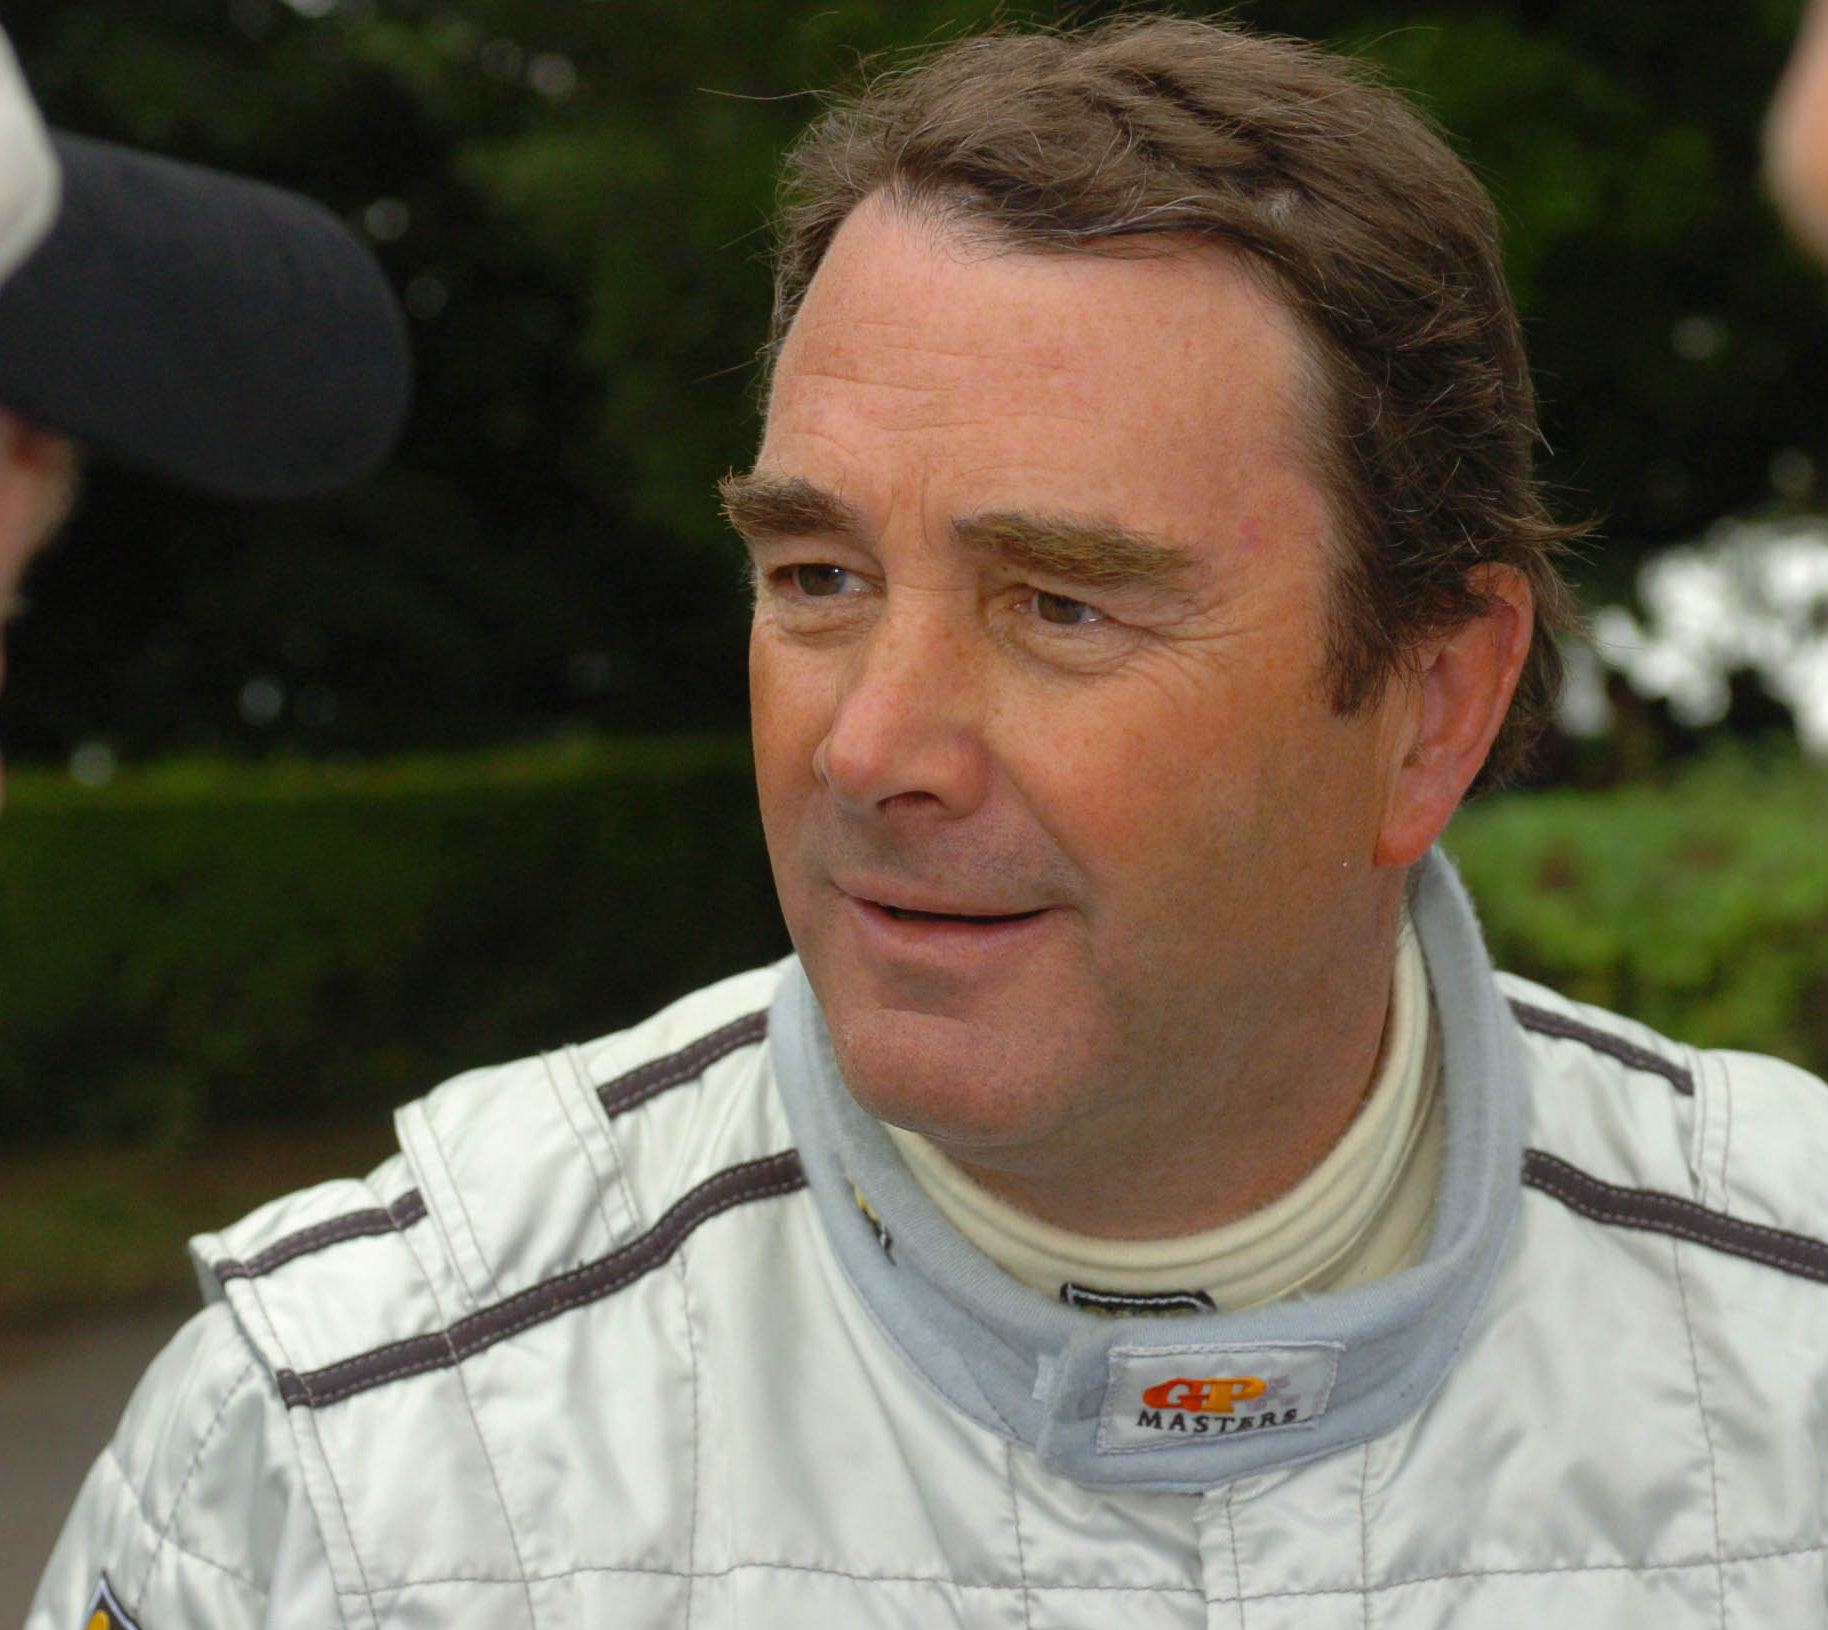 Other than a Formula One World Championship, what has Nigel Mansell earned?